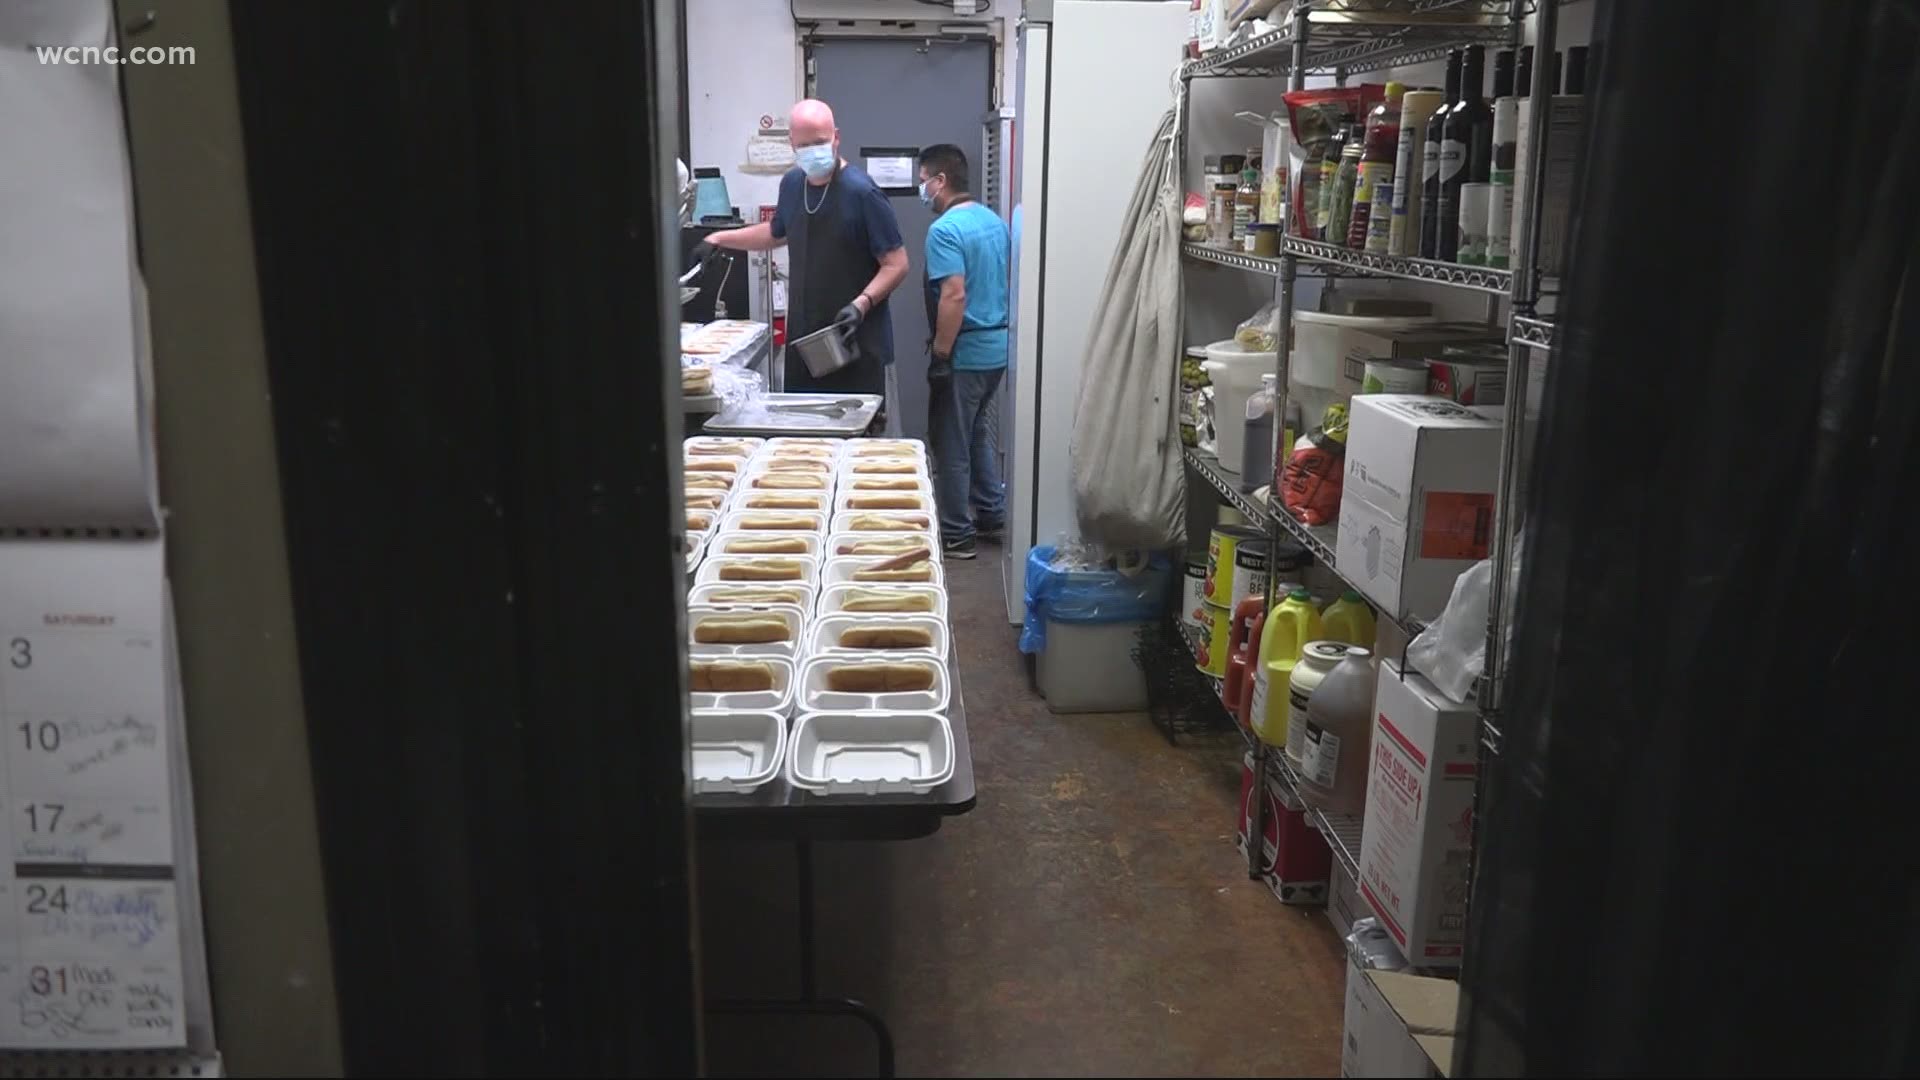 Choplin's Steak & Seafood has been cooking up school lunches to fill a need in the community.